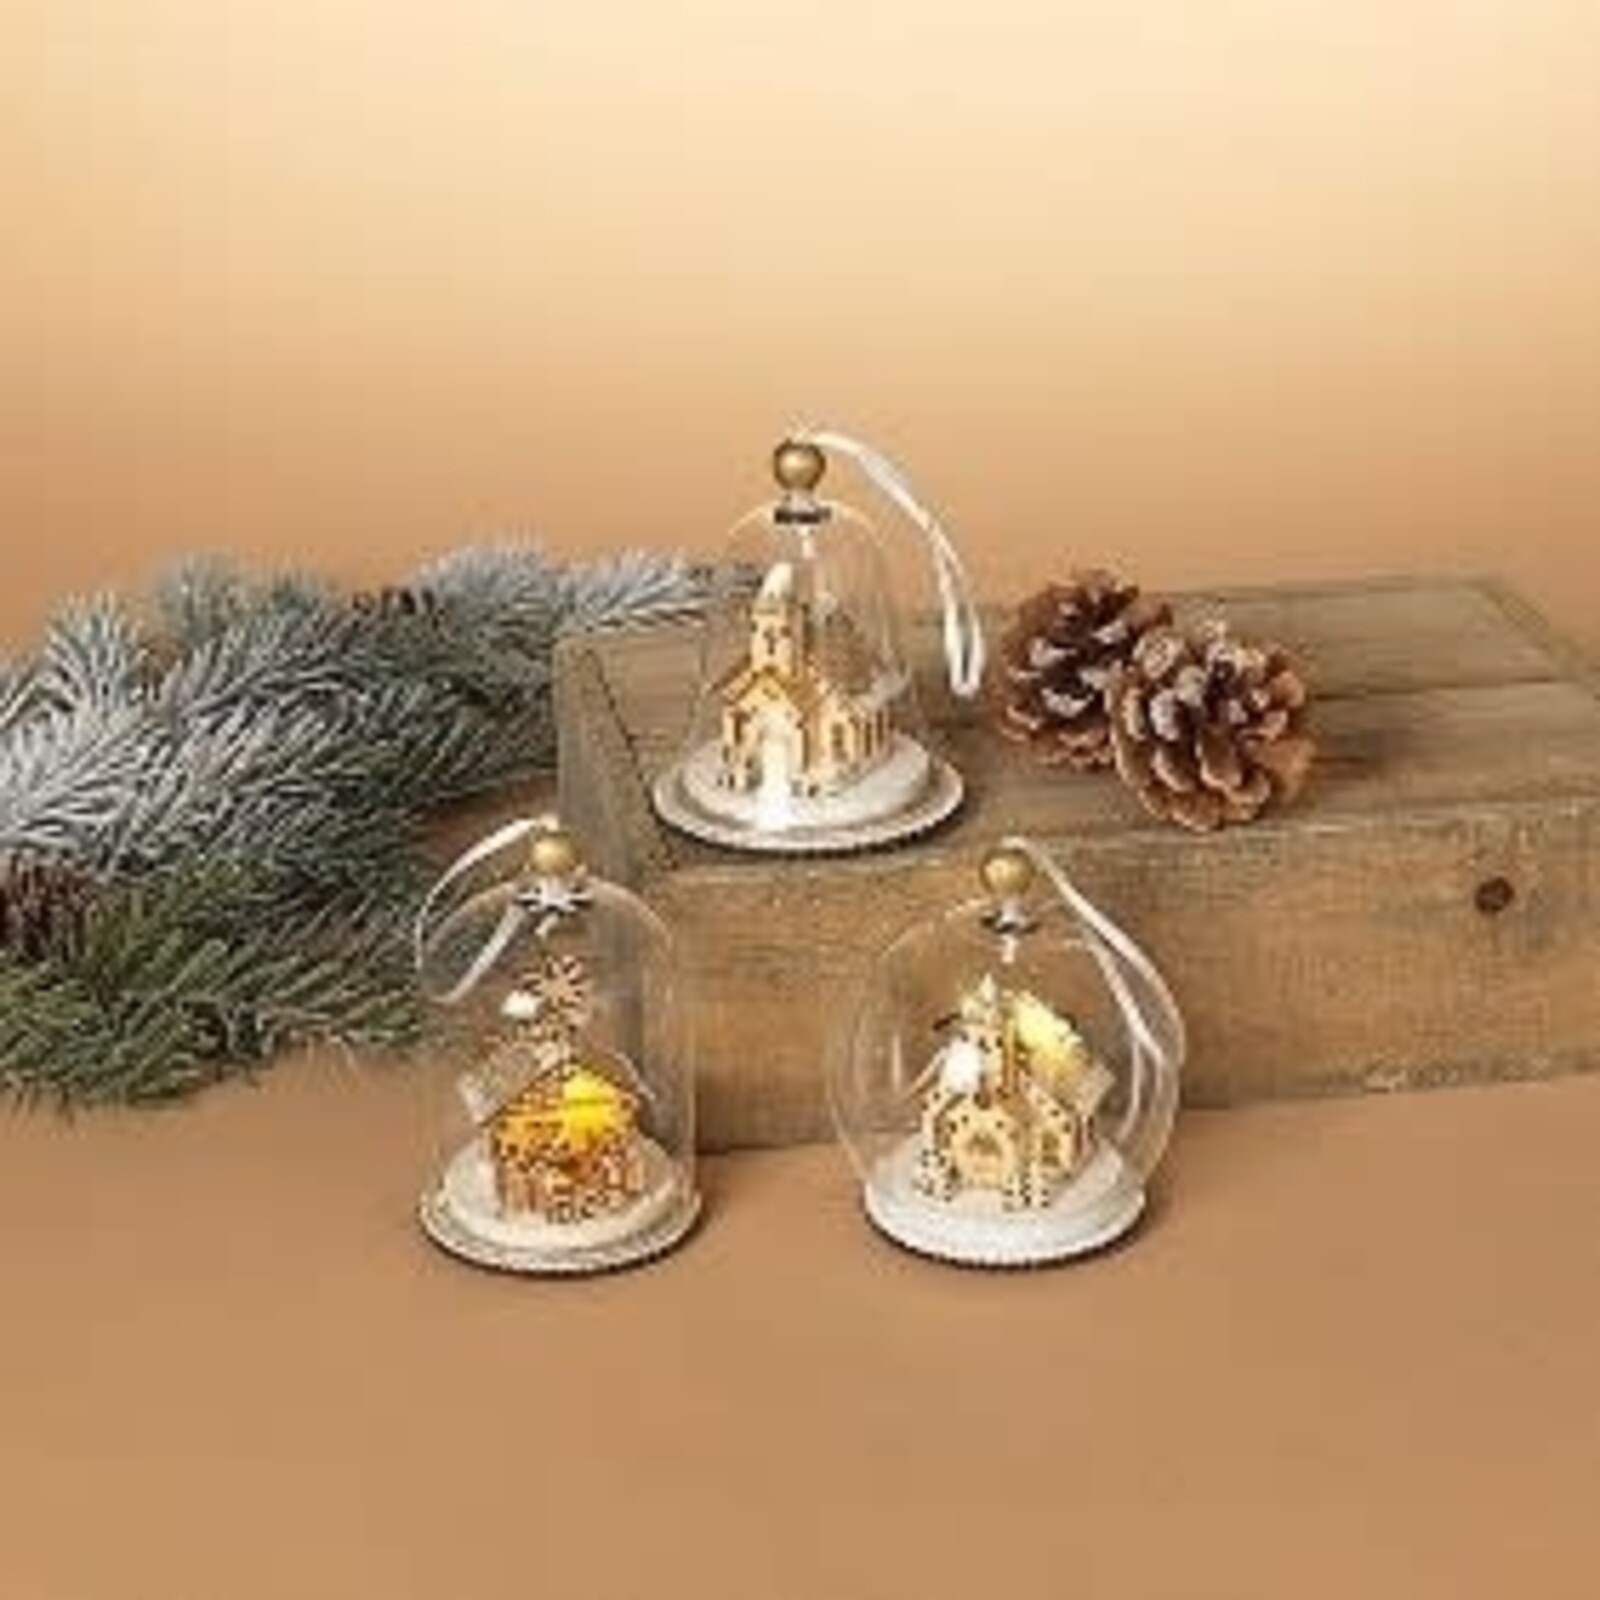 Gerson 4" Lighted Glass Dome Ornament  2543370 loading=